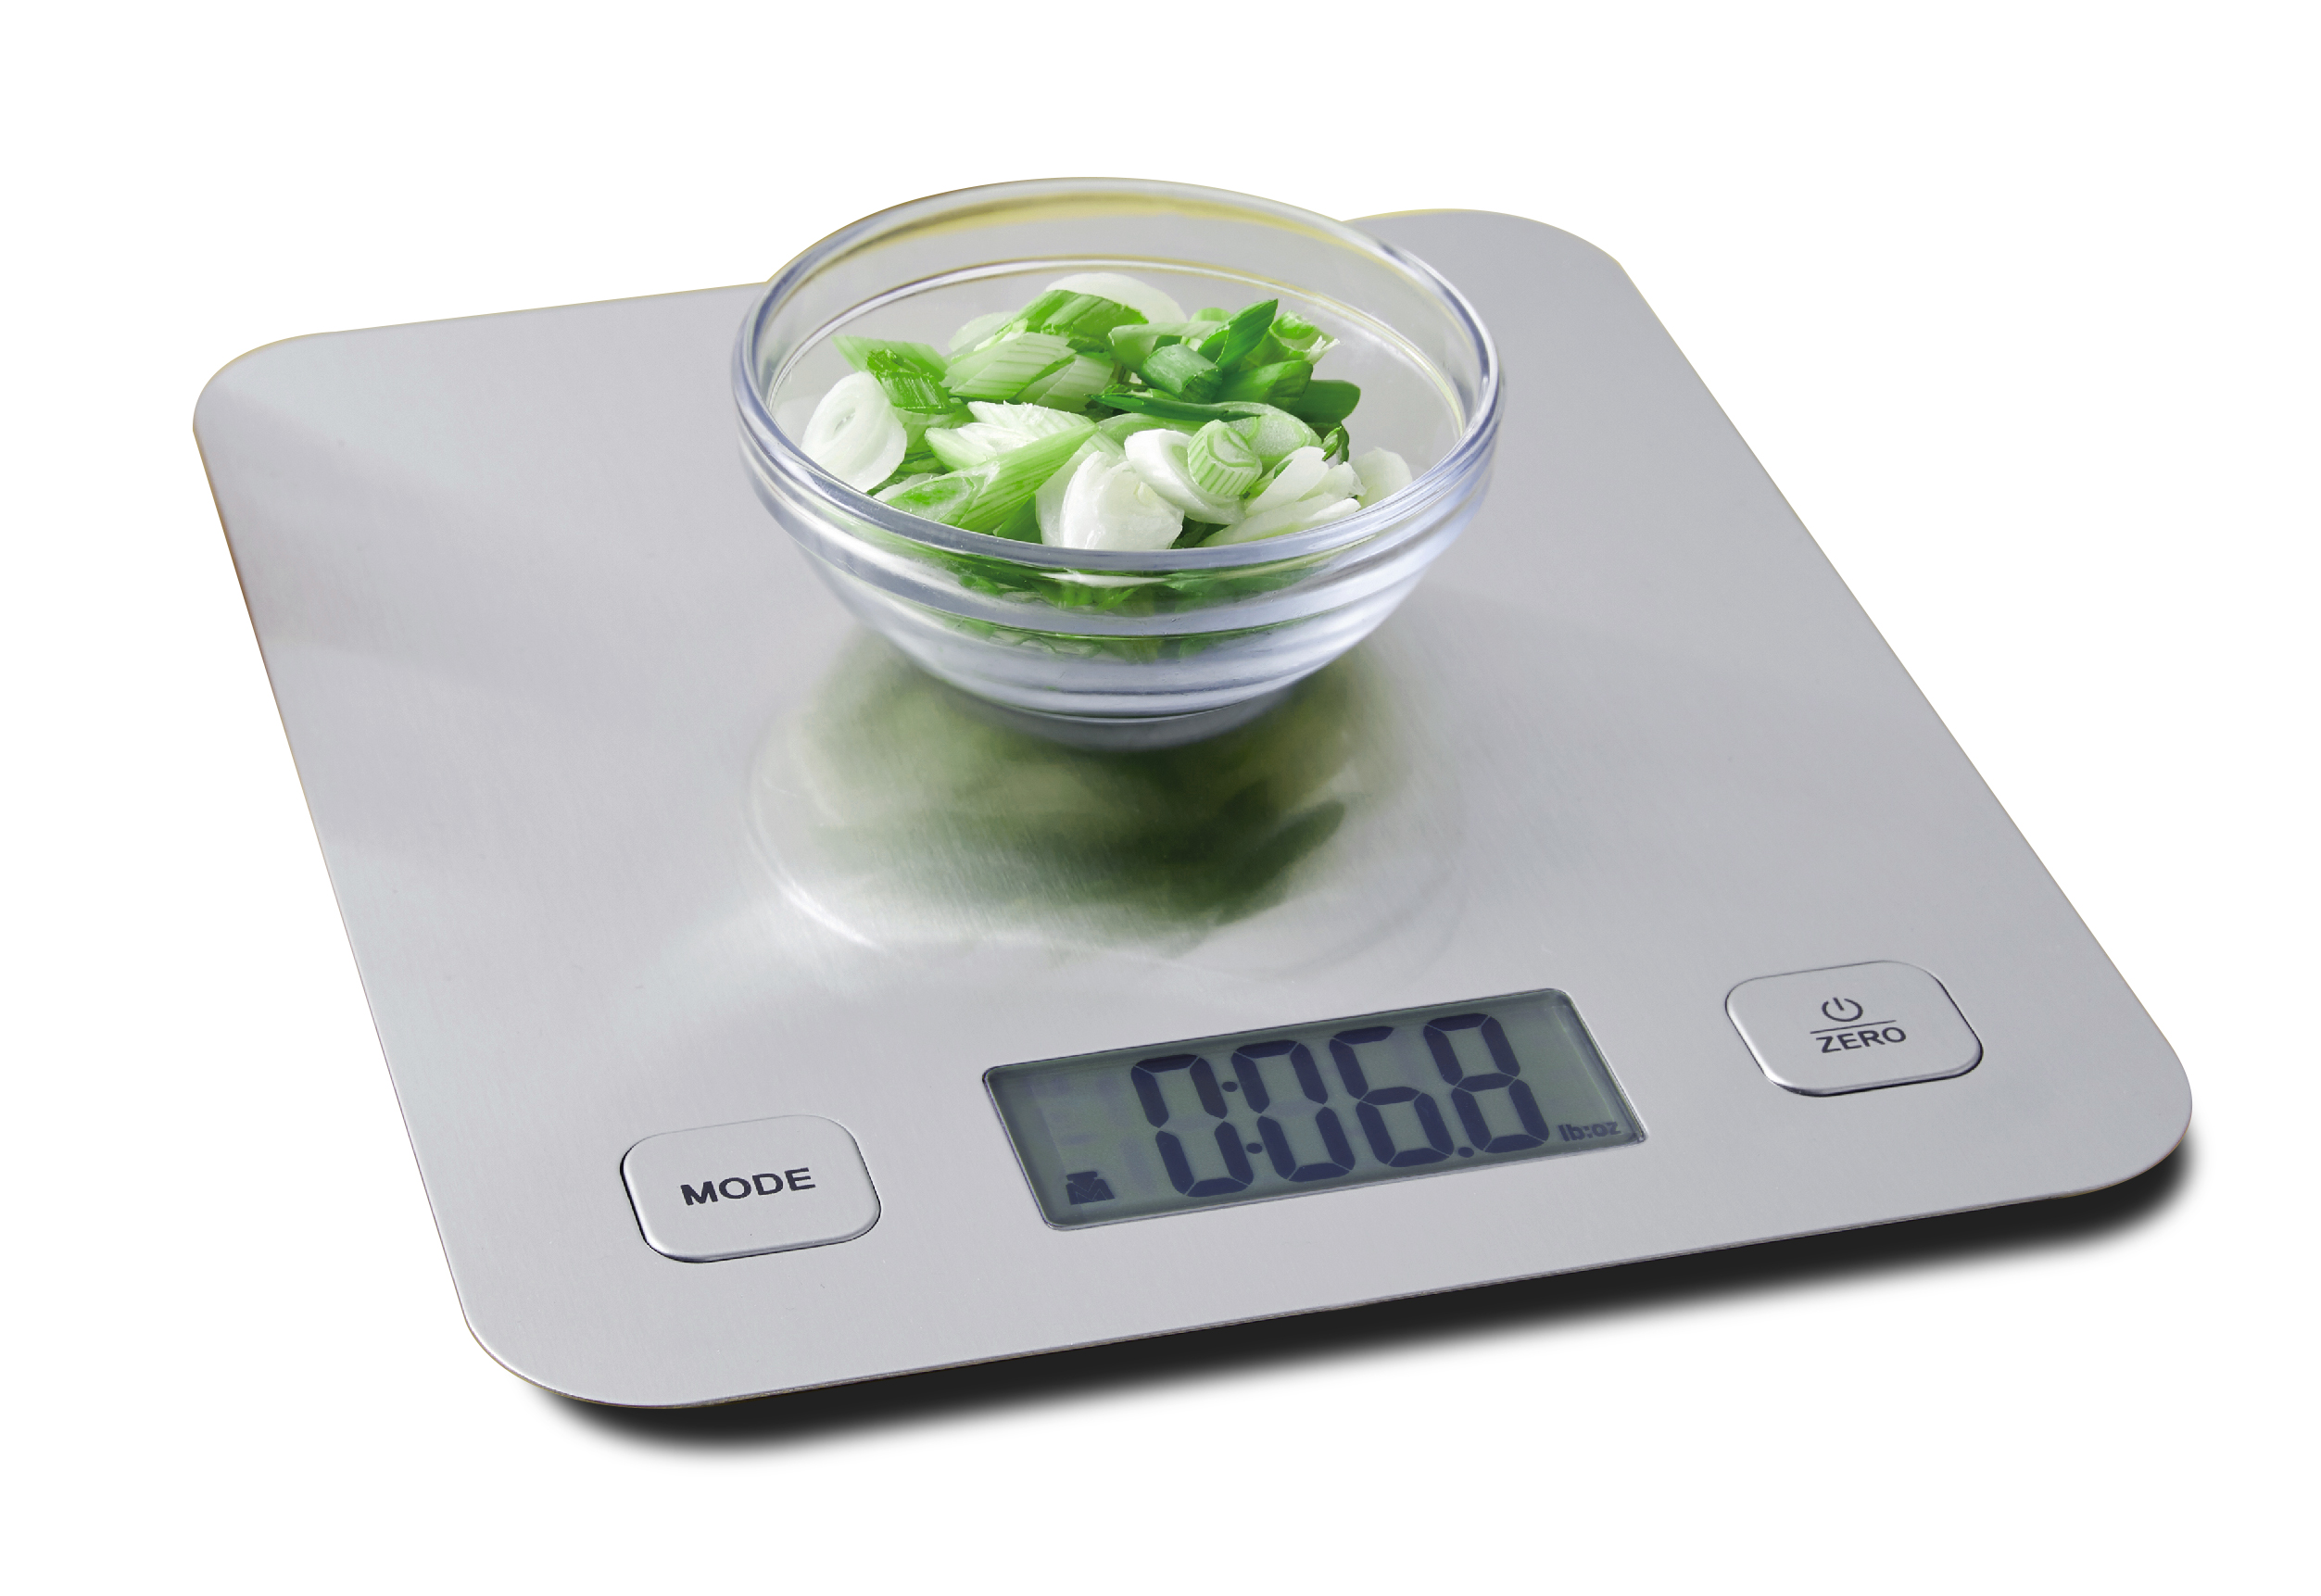 Mainstays Stainless Steel Digital Kitchen Scale, Silver - image 1 of 11